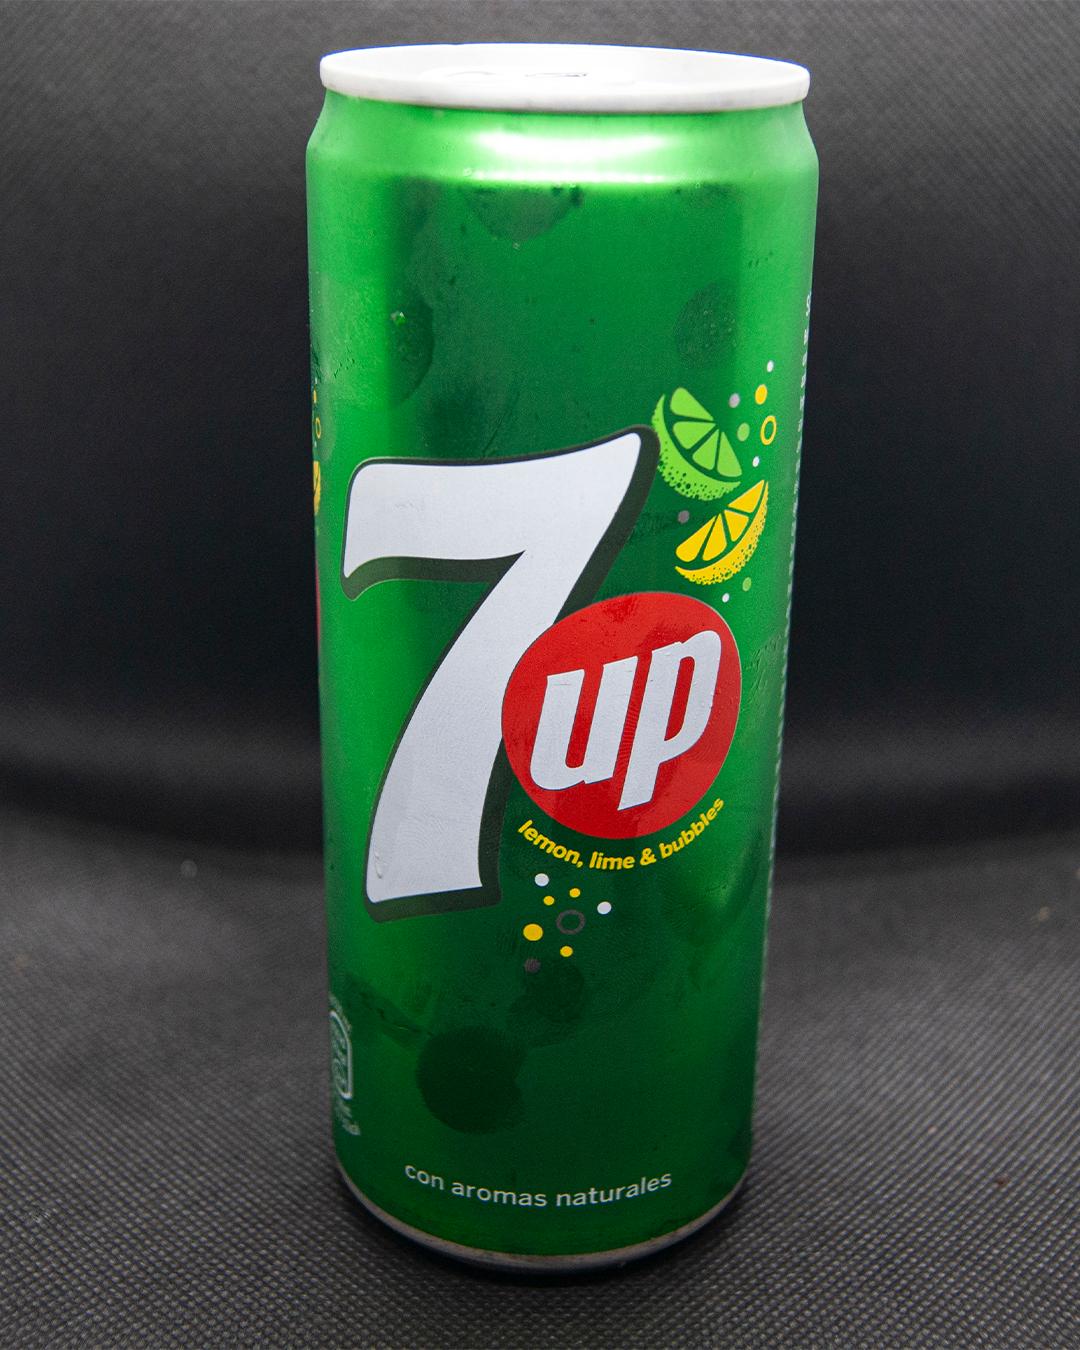 7UP